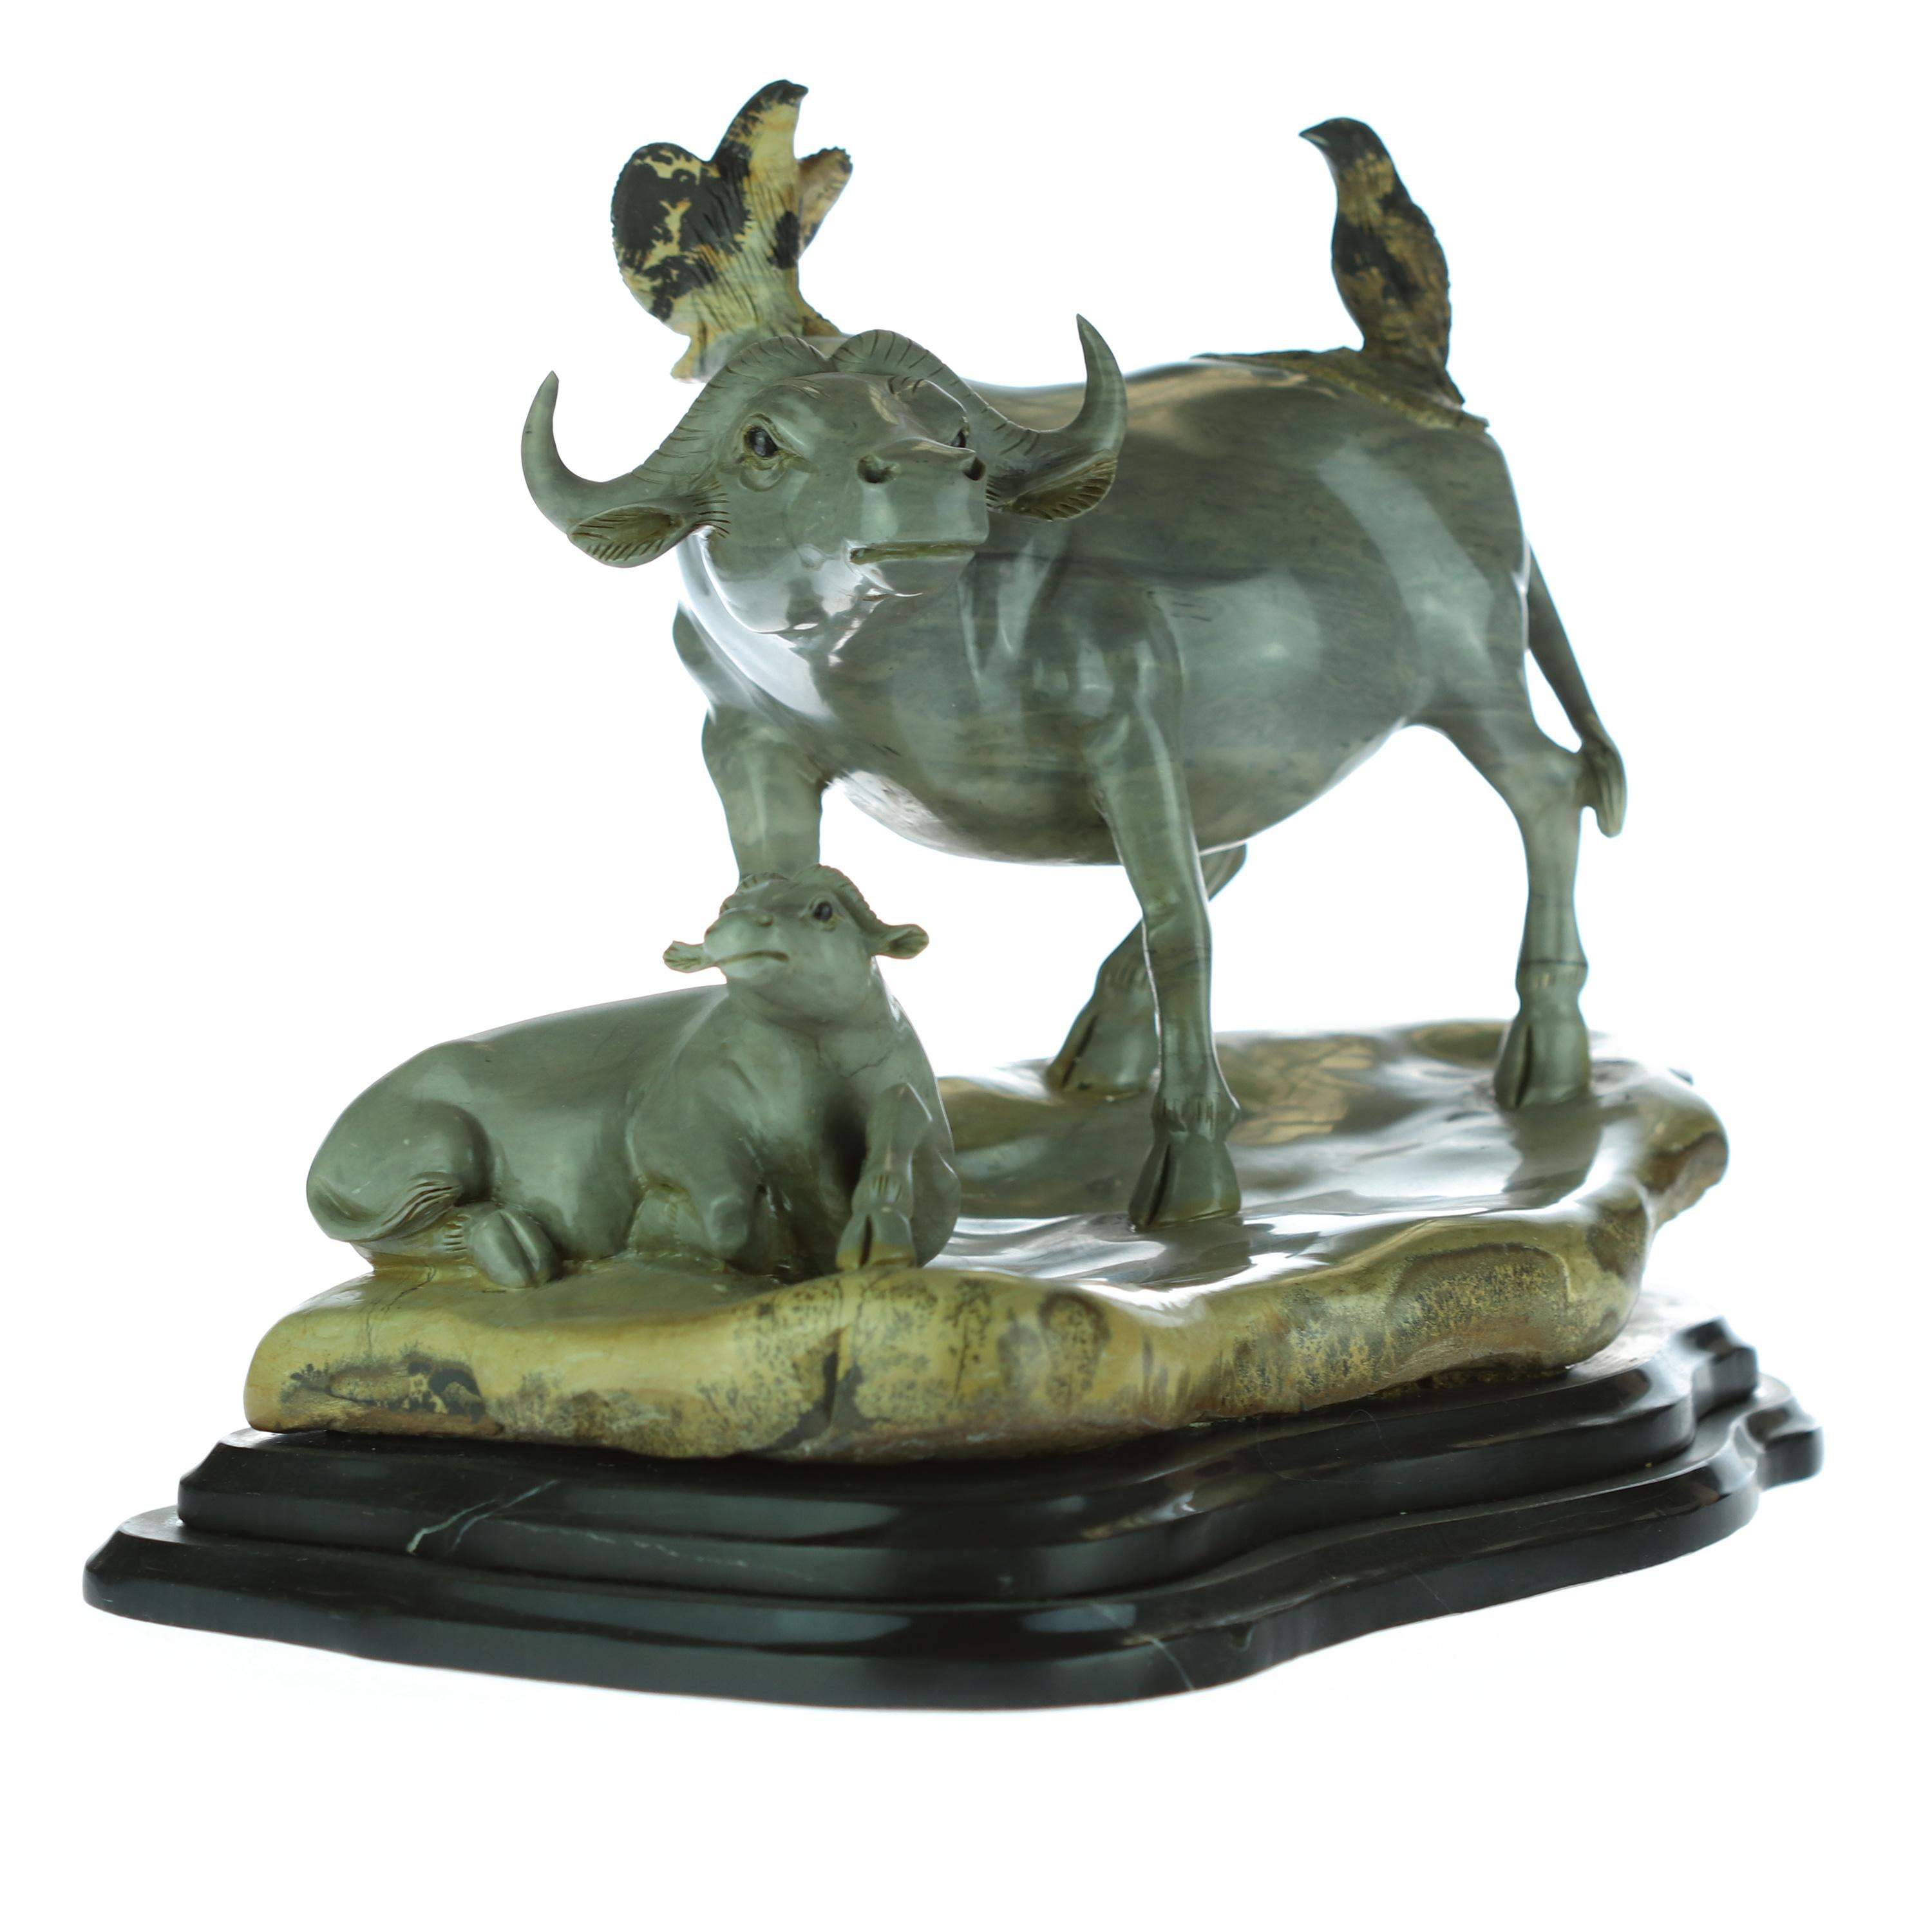 Stunning antique Chinese sculpture. Hand carved Australian Jasper that creates a unique buffalo family figurine. Full of detail and magic where 2 birds enjoy nature all around. Natural colors with a vivid feeling of joy and animal reality. A